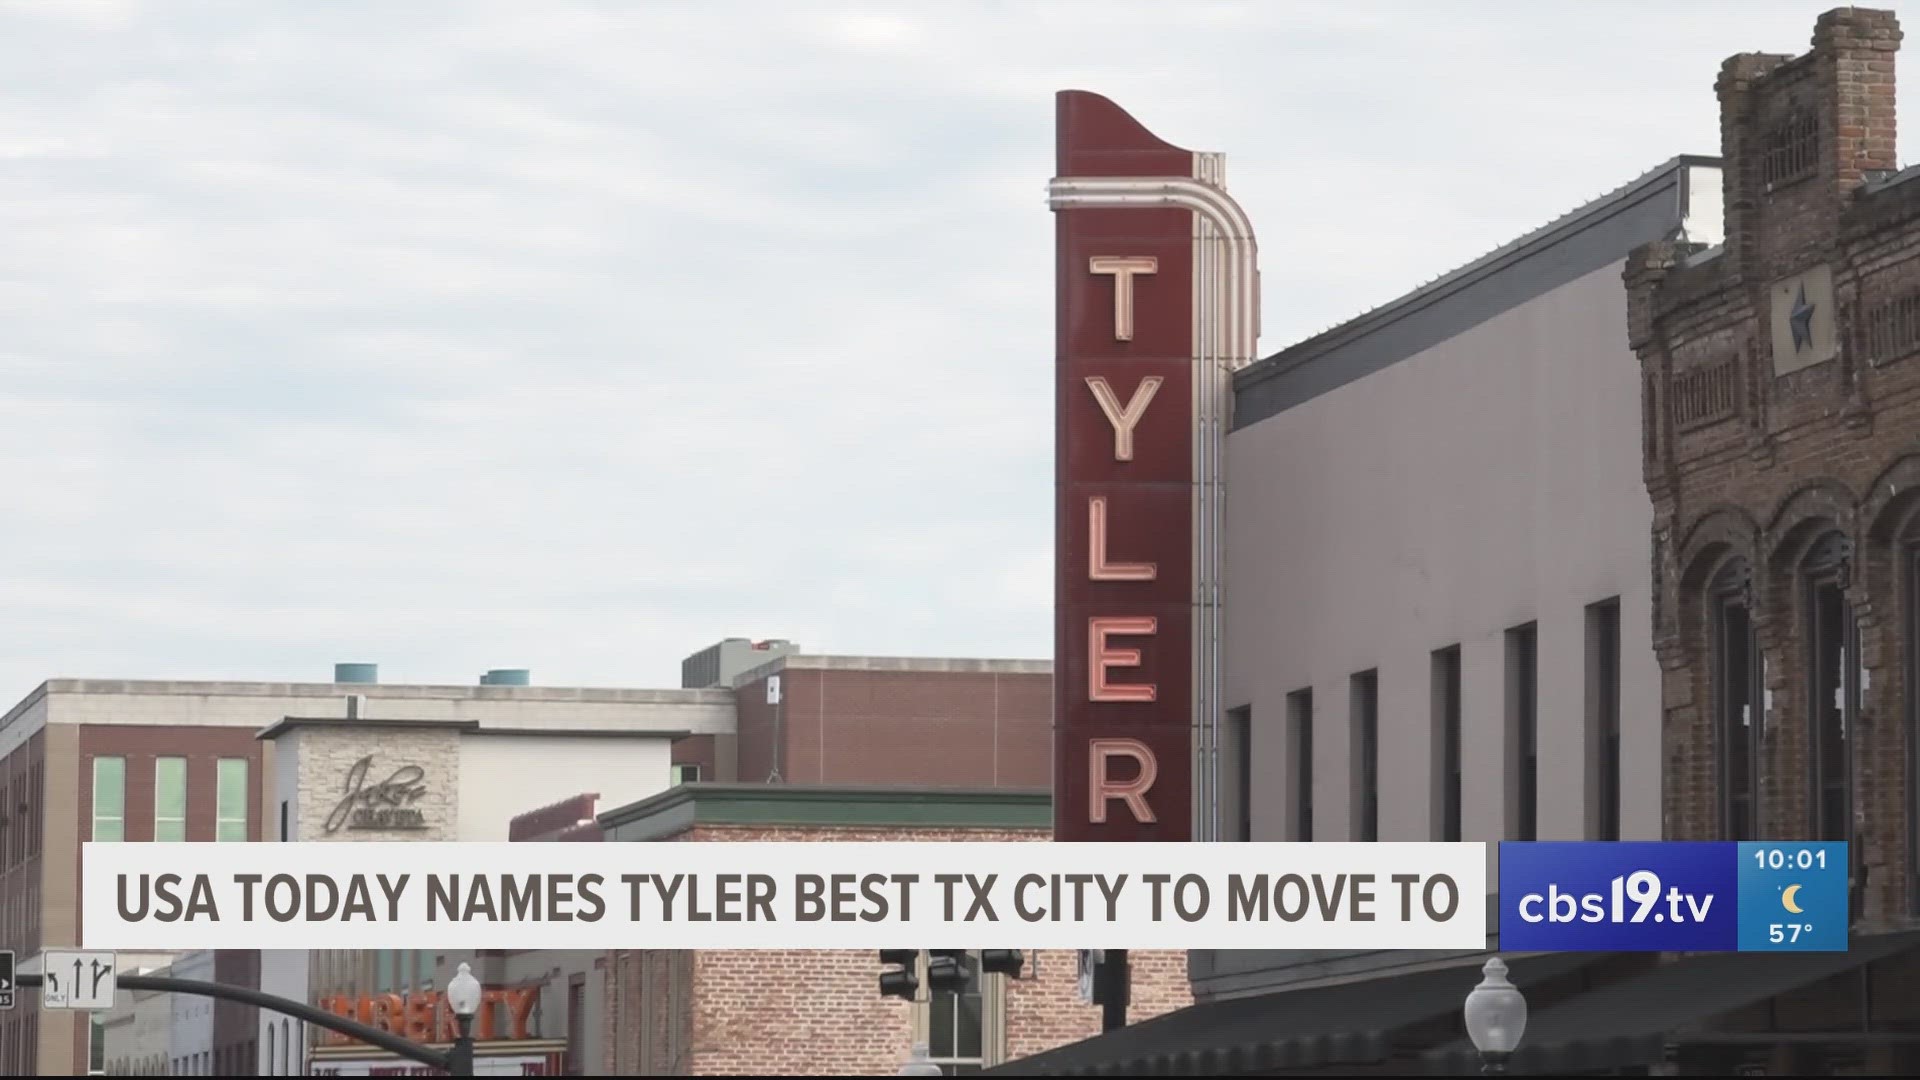 Smith and the folks at Visit Tyler are proud today after Tyler has been recognized as the top destination to move to in the Lone Star State.